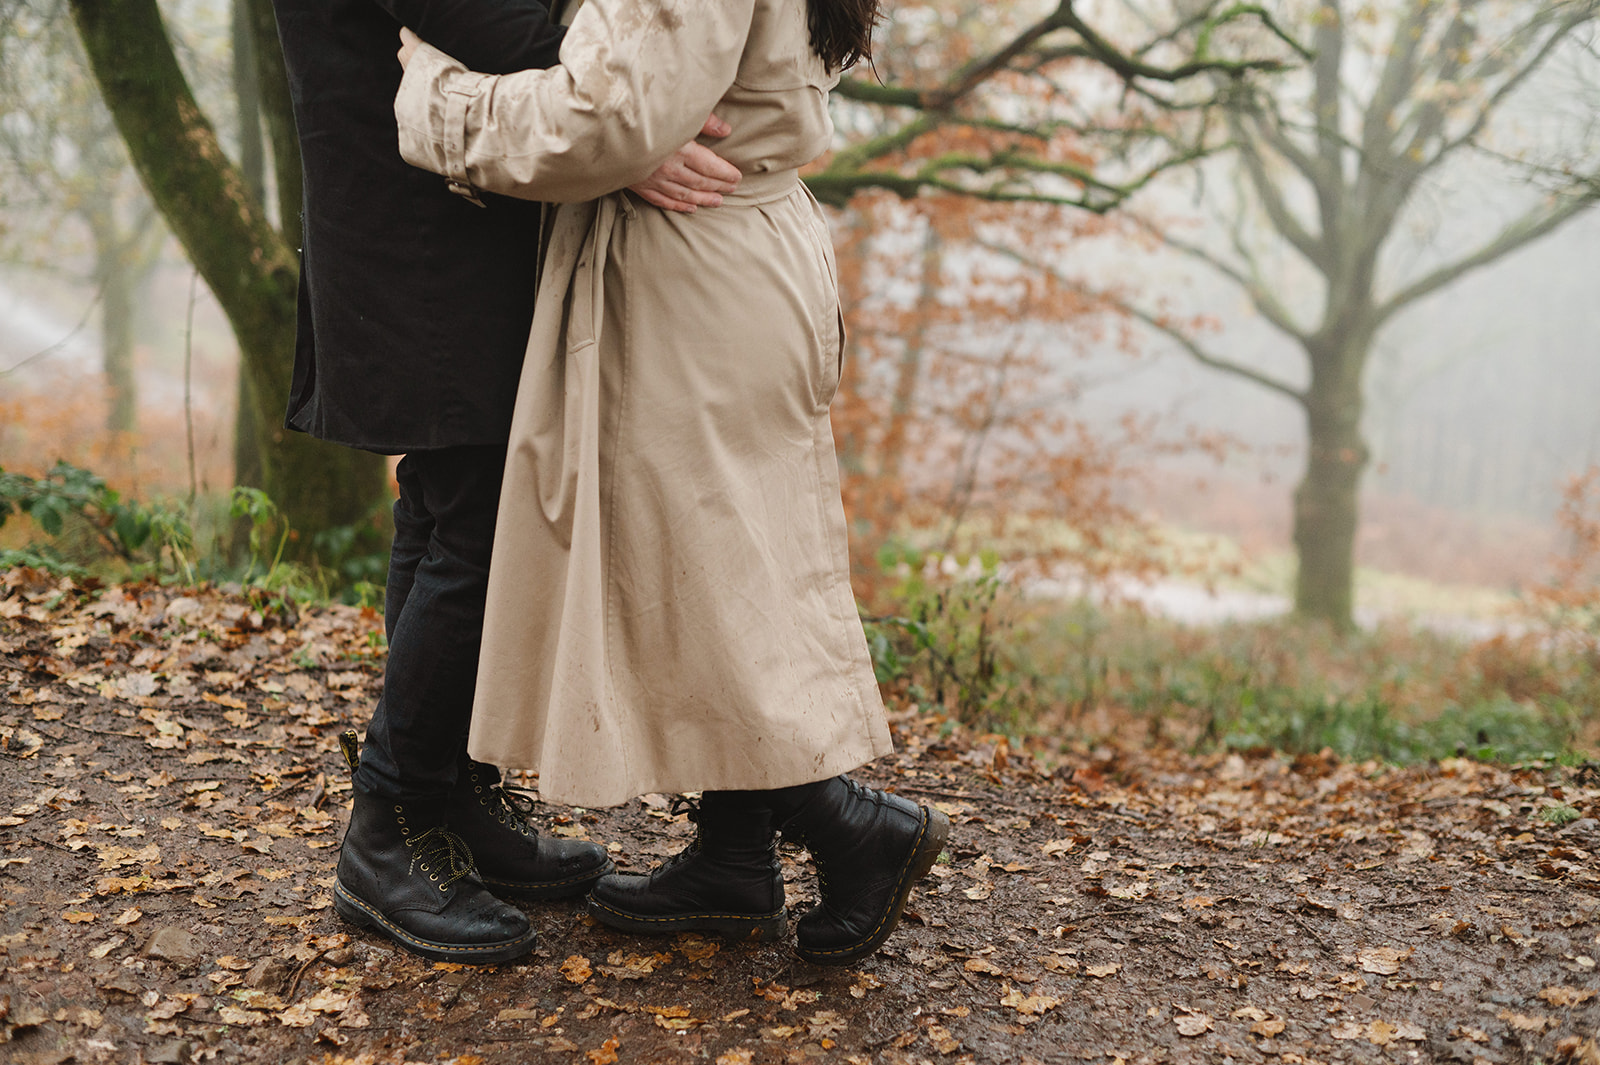 a wet engagement photo shoot in the Clent Hills